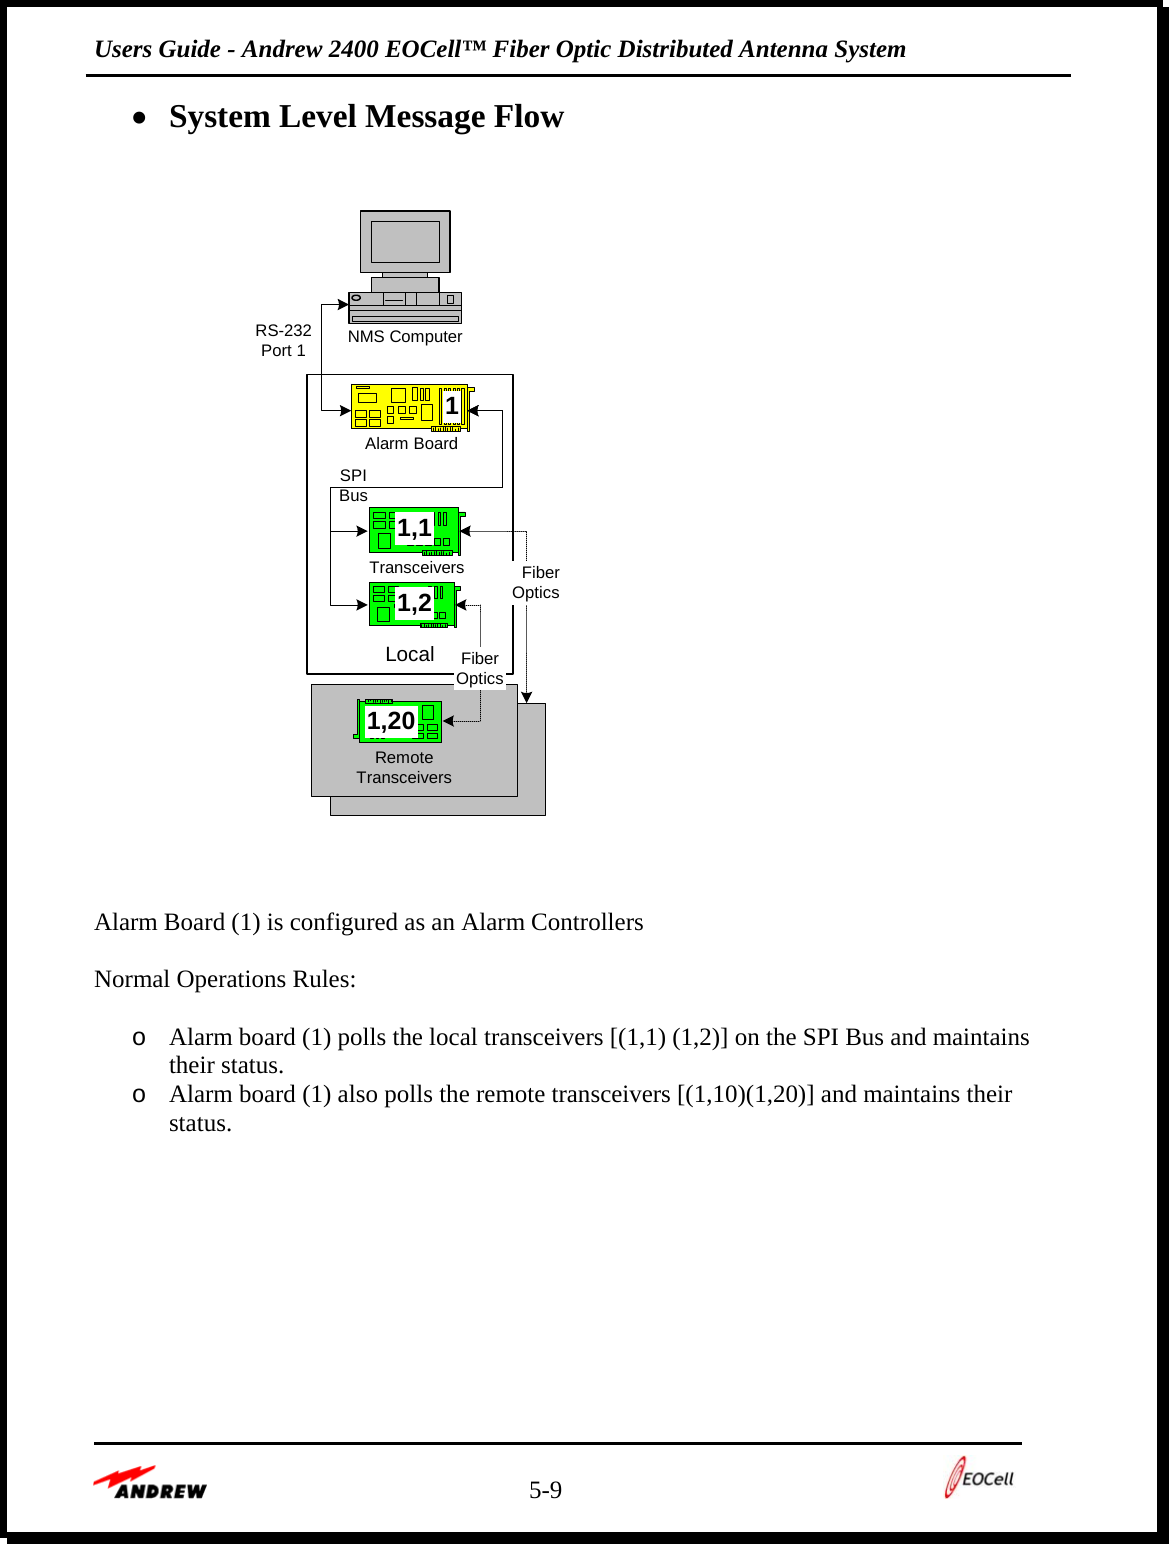 Users Guide - Andrew 2400 EOCell™ Fiber Optic Distributed Antenna System    5-9    • System Level Message Flow  NMS ComputerAlarm BoardTransceivers FiberOpticsRS-232Port 1SPIBusLocal11,11,2RemoteTransceivers1,20FiberOptics       Alarm Board (1) is configured as an Alarm Controllers  Normal Operations Rules:  o Alarm board (1) polls the local transceivers [(1,1) (1,2)] on the SPI Bus and maintains their status. o Alarm board (1) also polls the remote transceivers [(1,10)(1,20)] and maintains their status.  